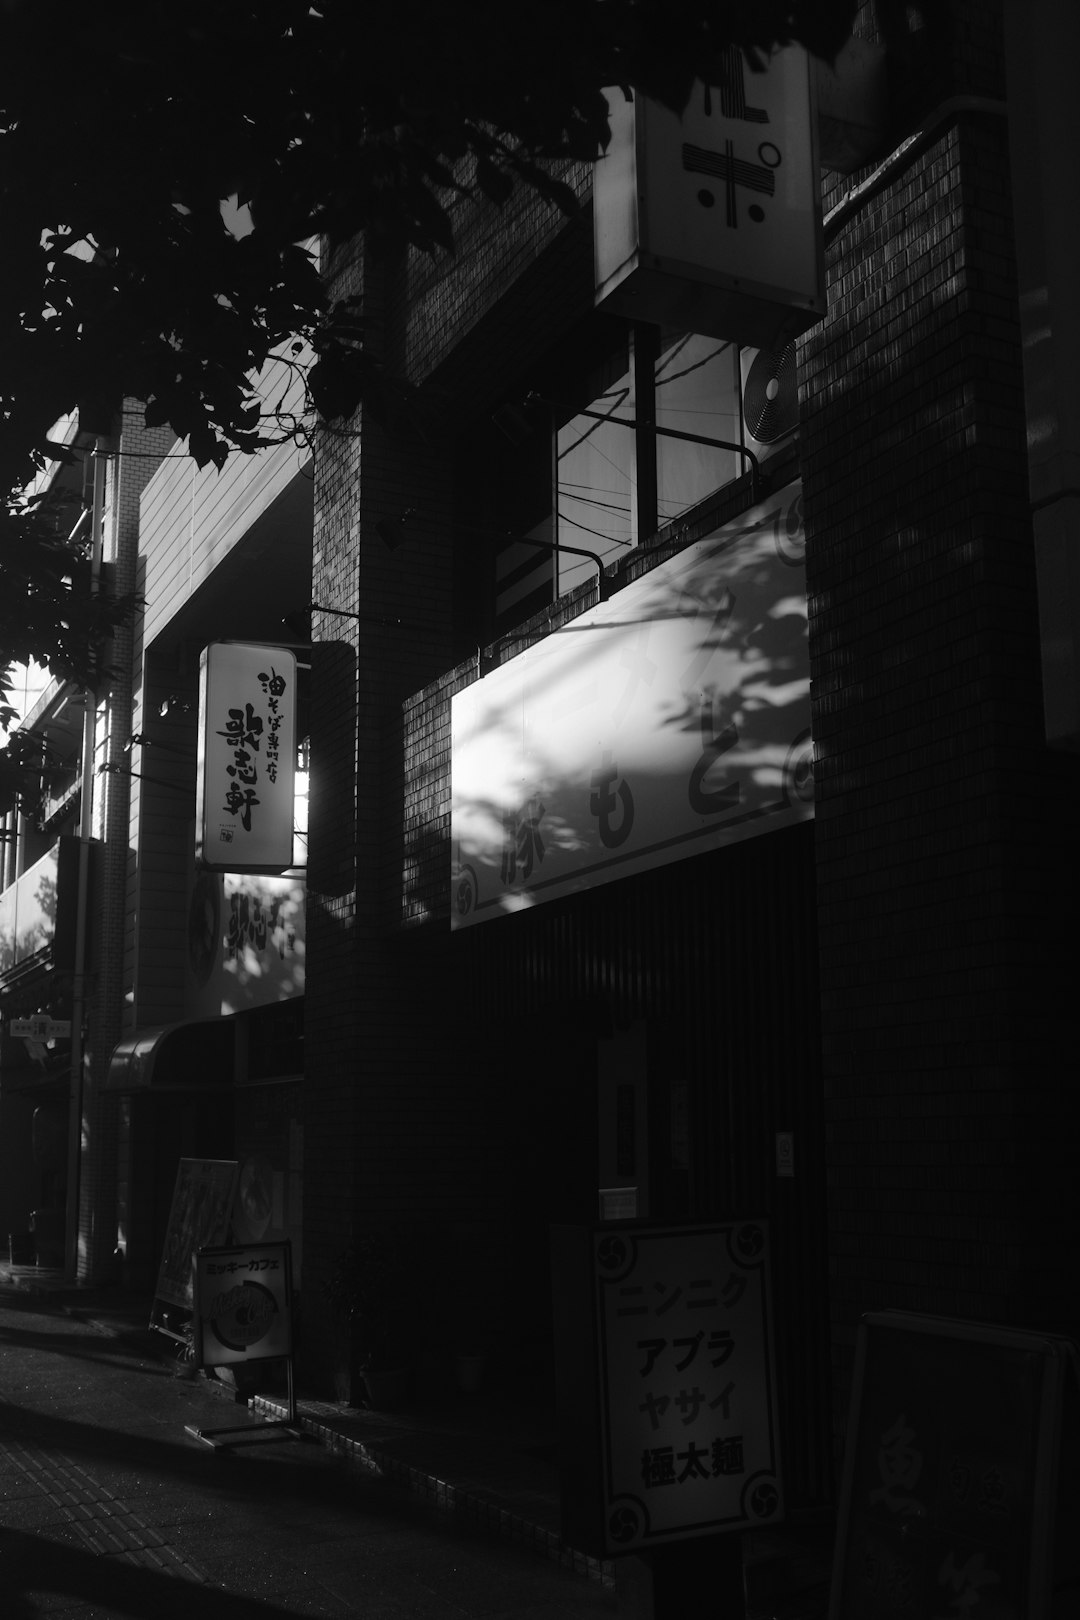 grayscale photo of store front